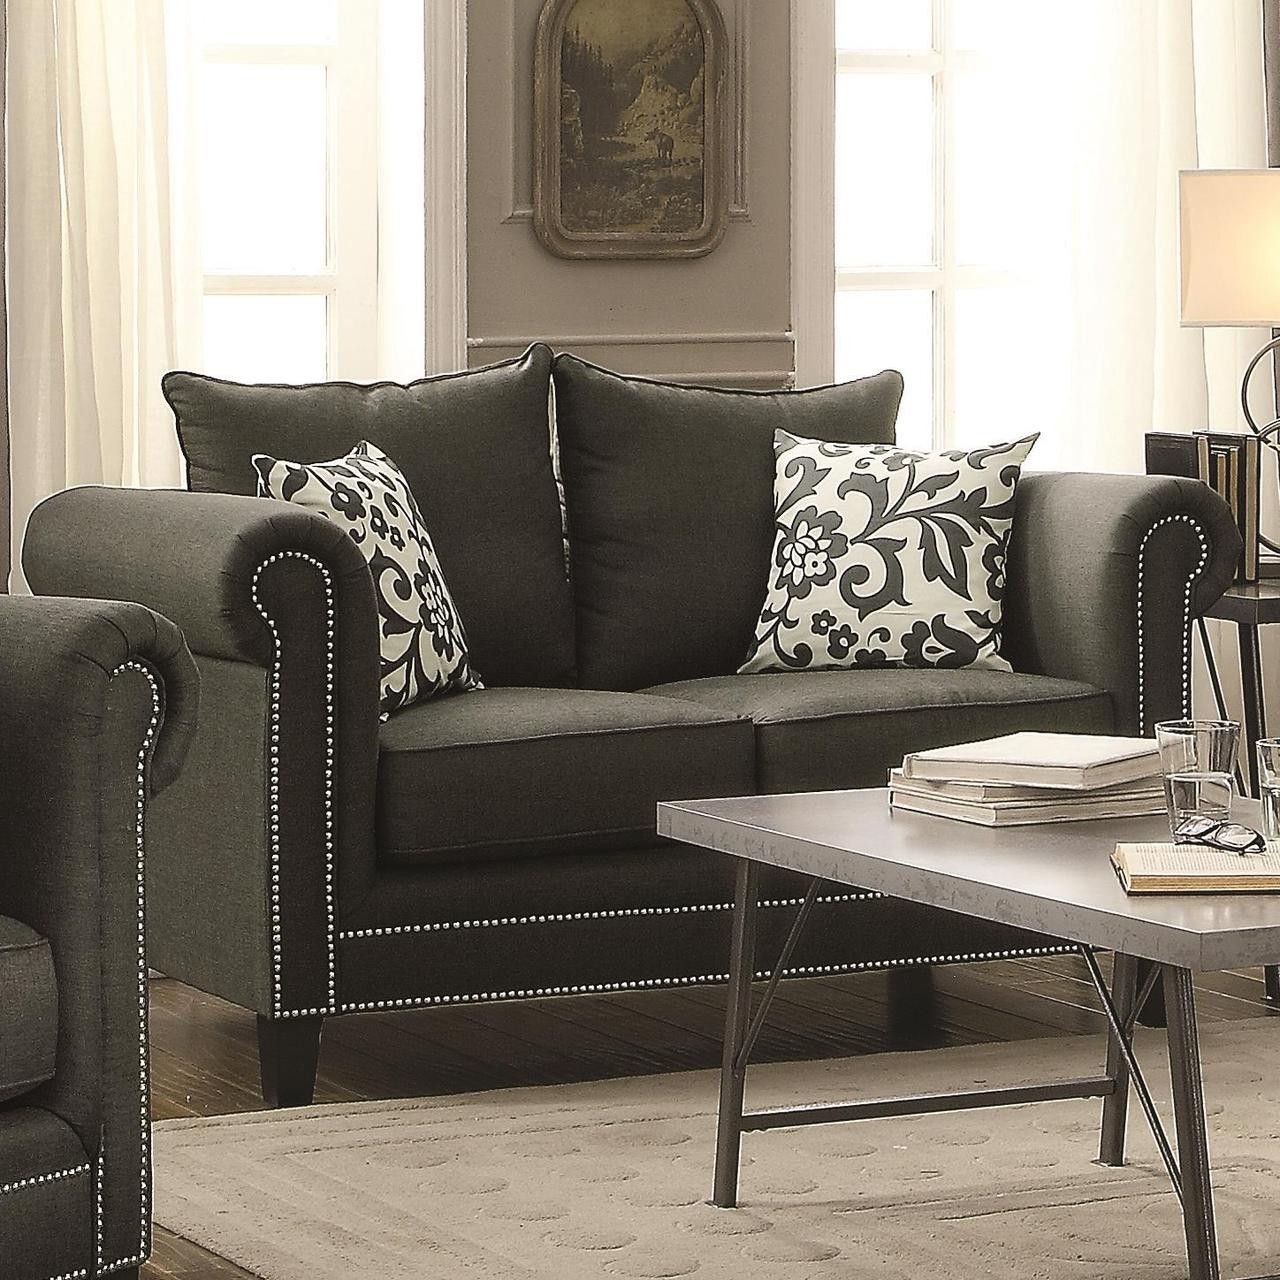 Beatrice Charcoal Linen Sofa And Loveseat – Cb Furniture In Light Charcoal Linen Sofas (View 7 of 20)